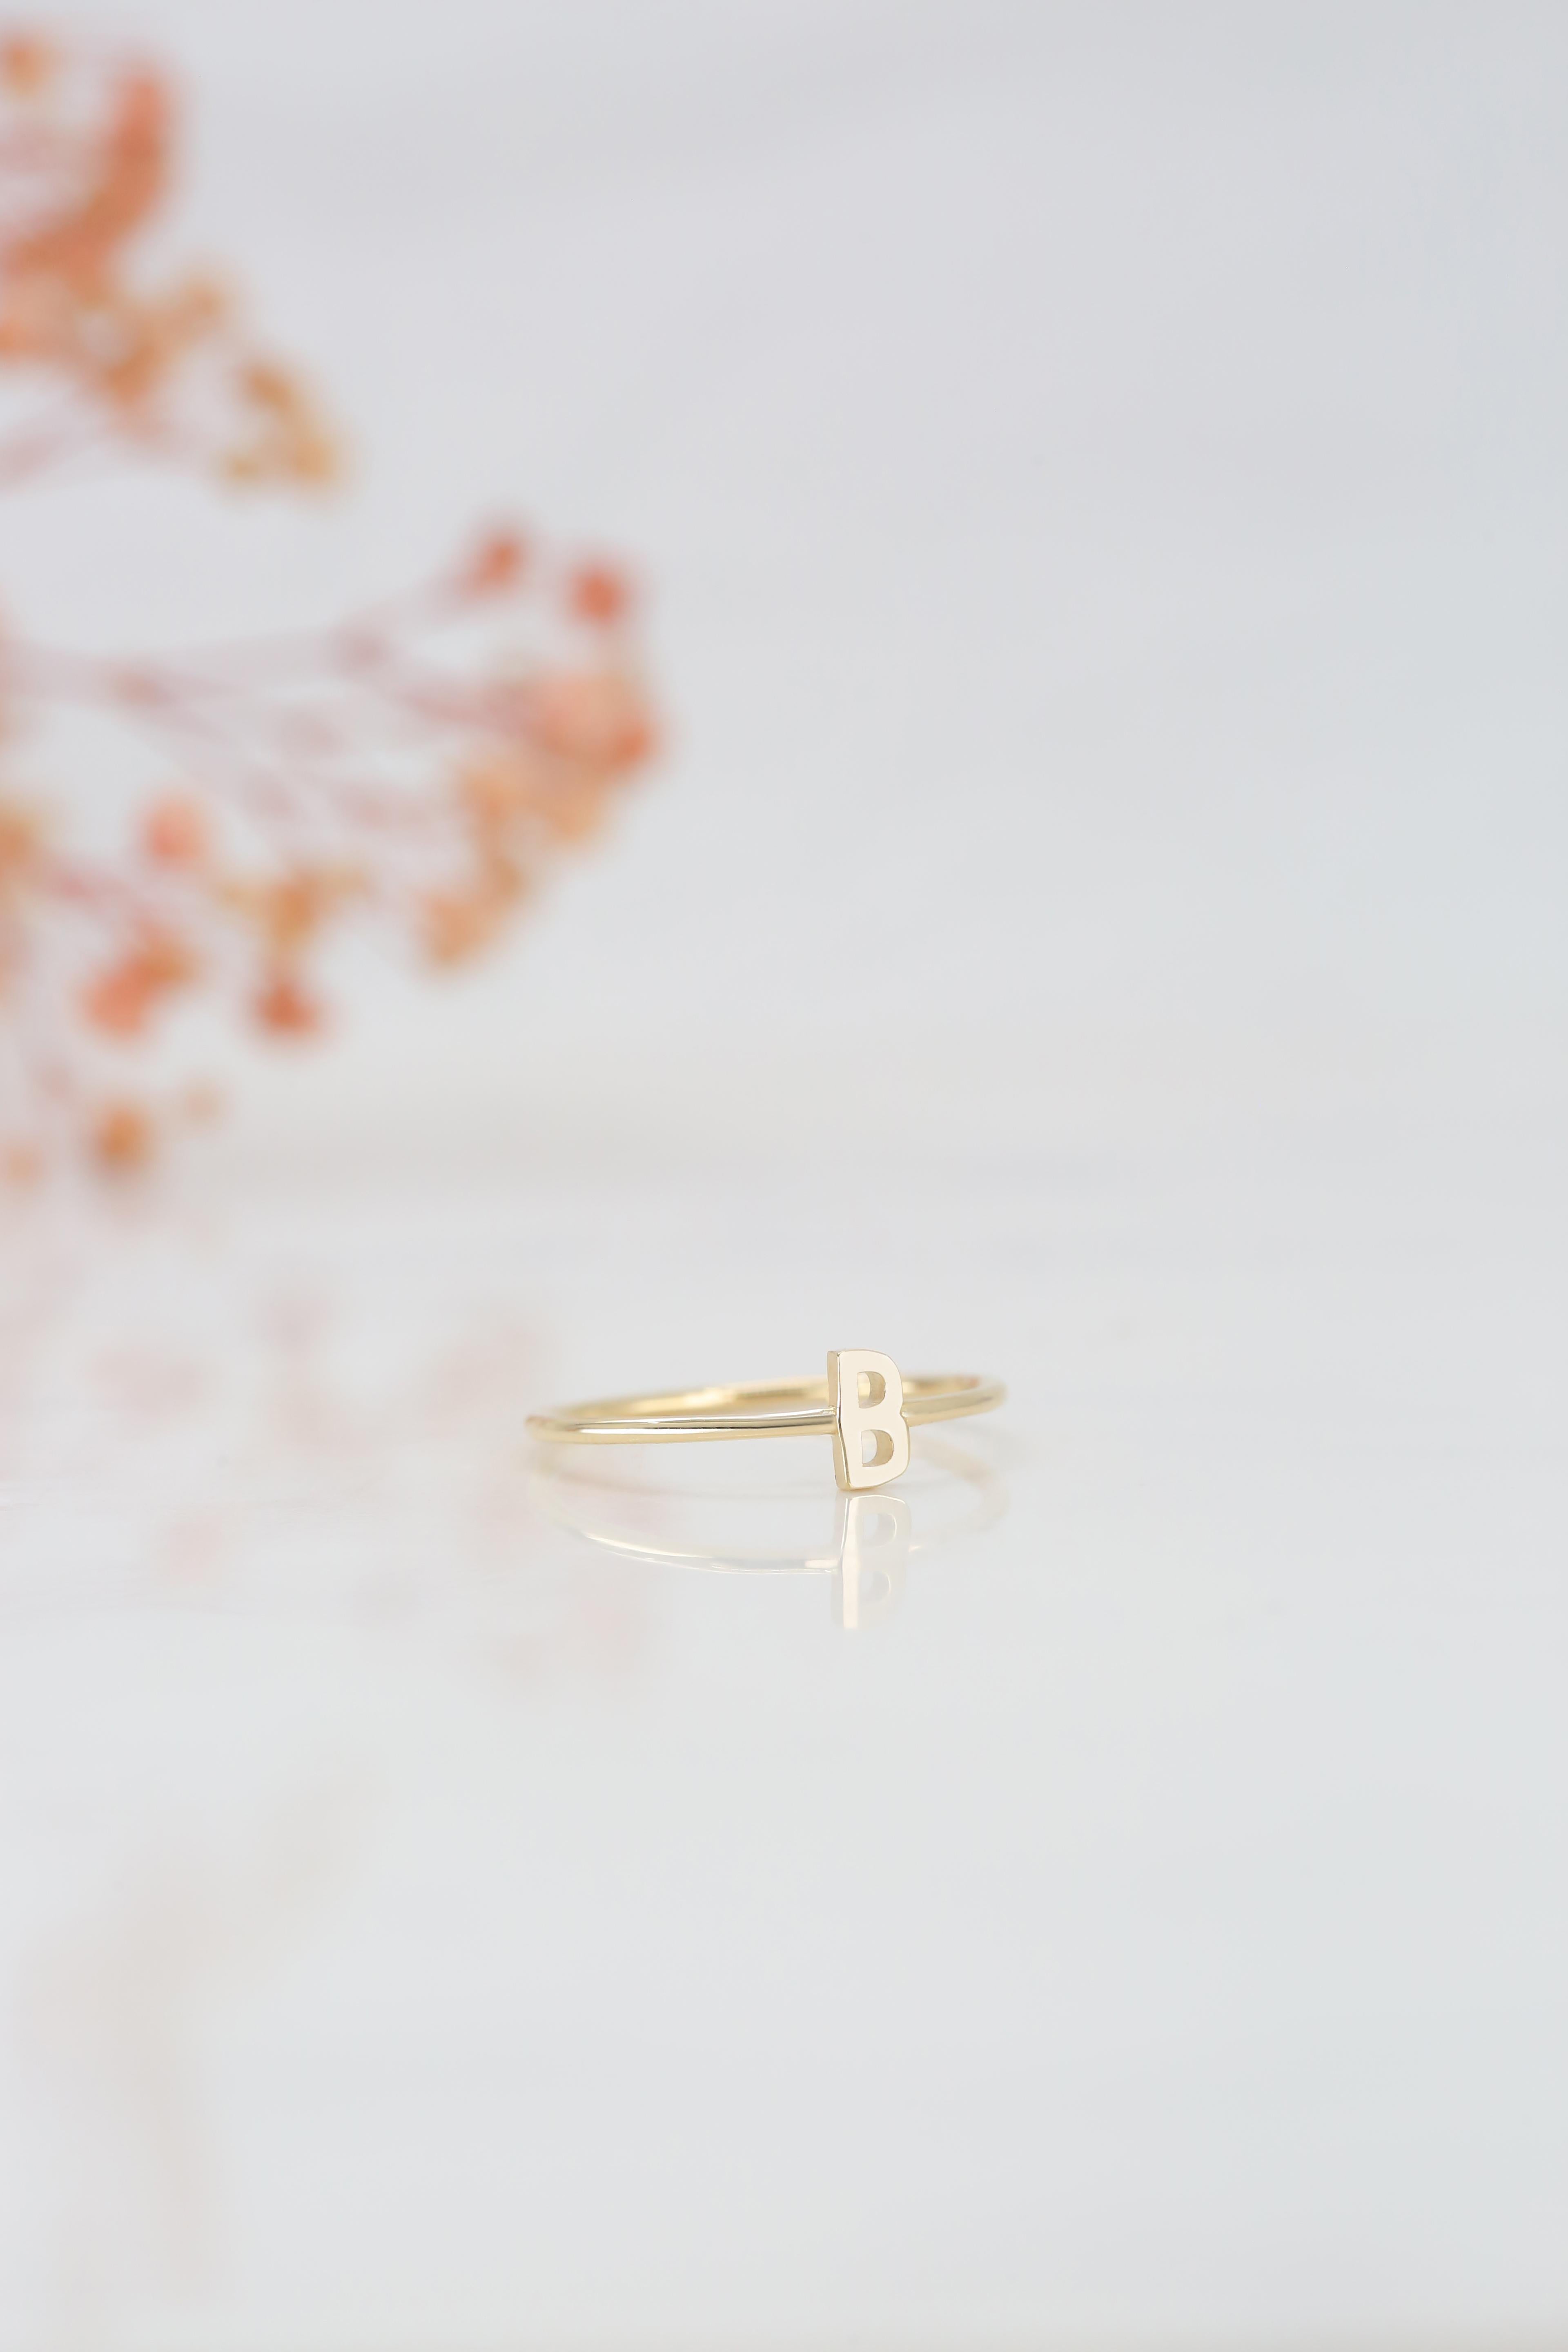 For Sale:  14K Gold Initial B Letter Ring, Personalized Initial Letter Ring 4